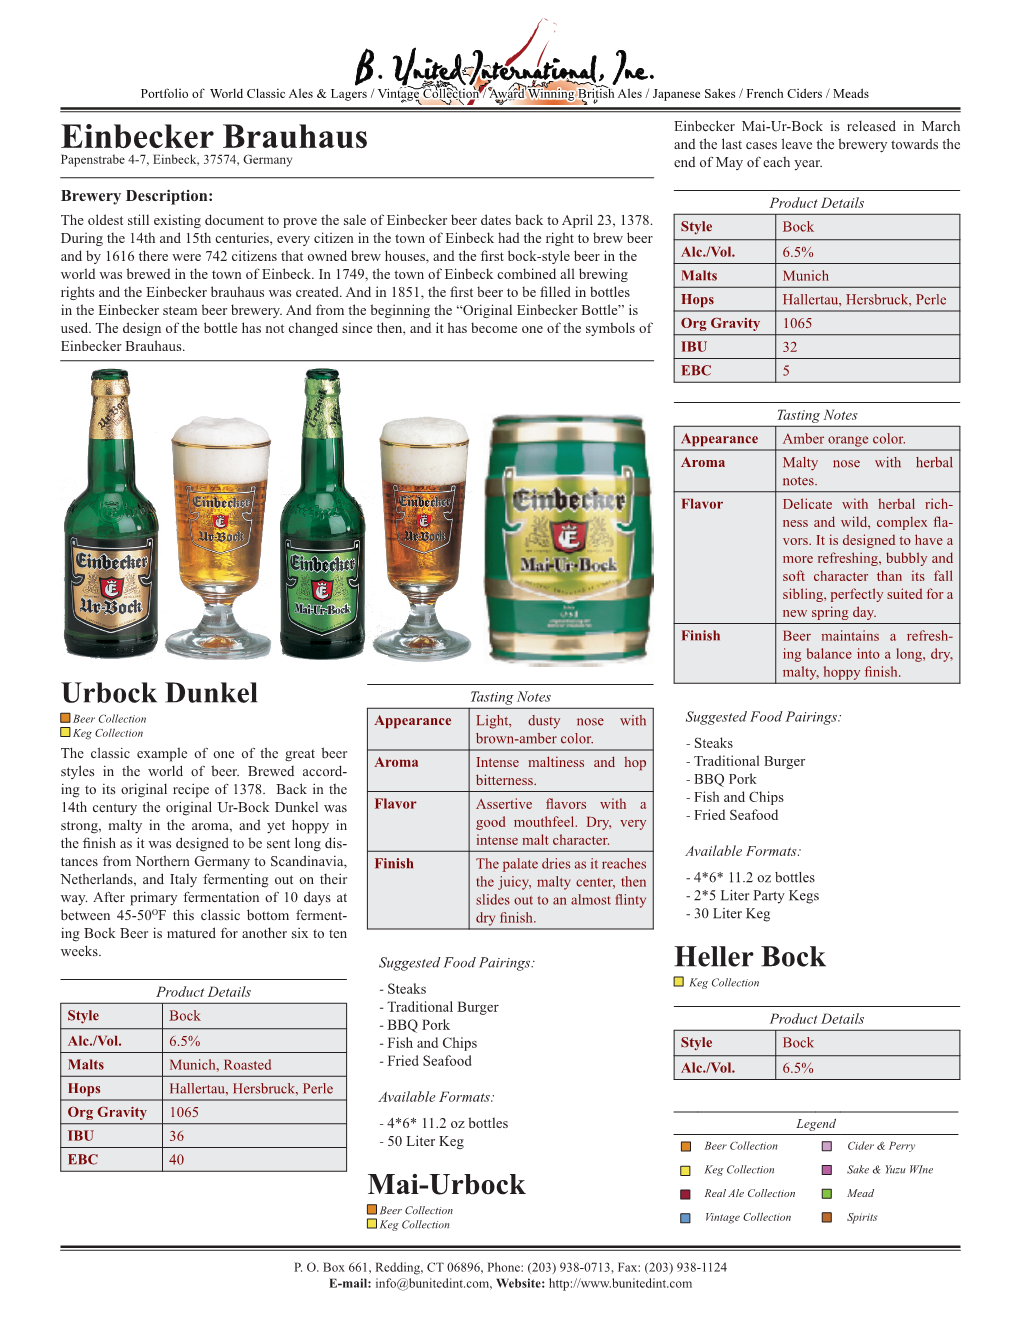 Einbecker Brauhaus and the Last Cases Leave the Brewery Towards the Papenstrabe 4-7, Einbeck, 37574, Germany End of May of Each Year